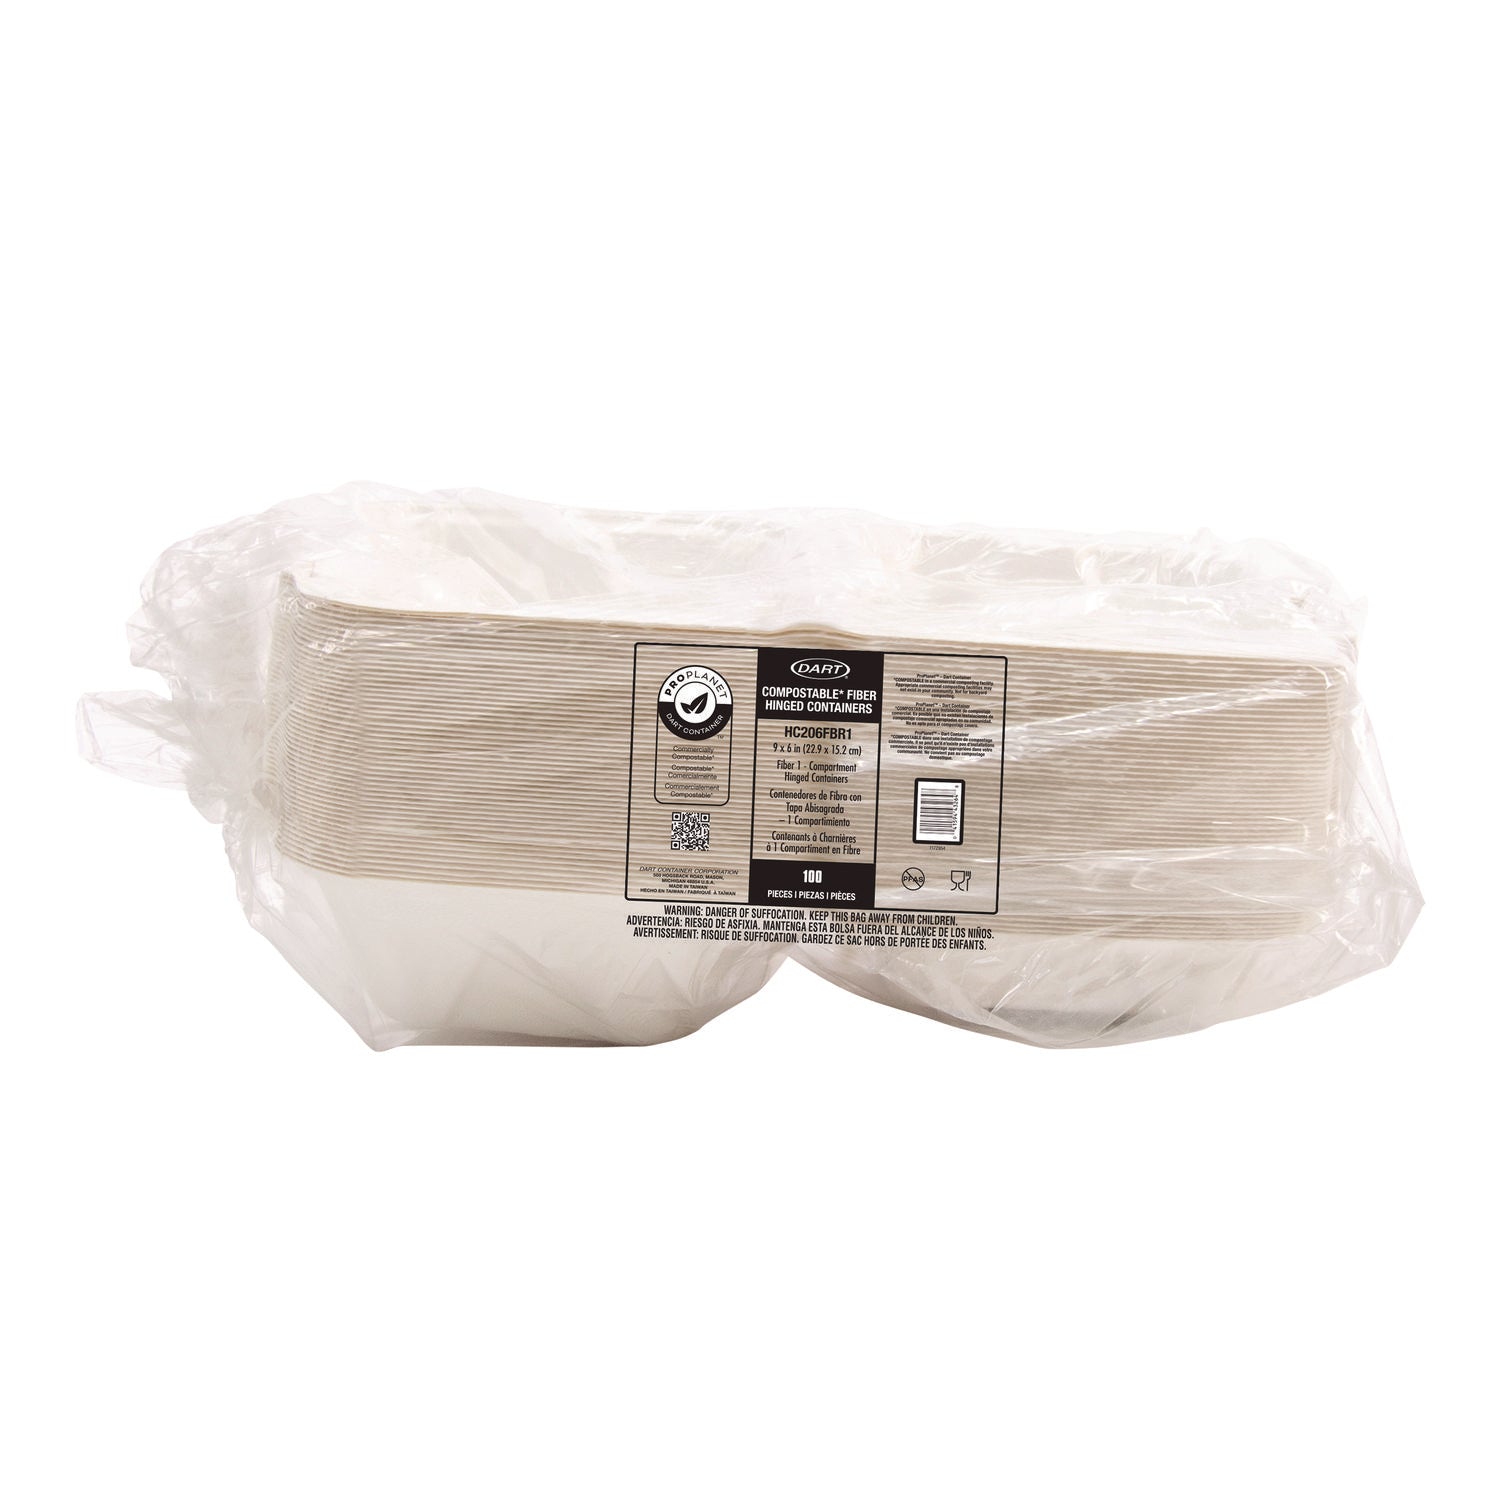 compostable-fiber-hinged-containers-proplanet-seal-634-x-906-x-197-ivory-molded-fiber-200-carton_dcchc206fbr1 - 5